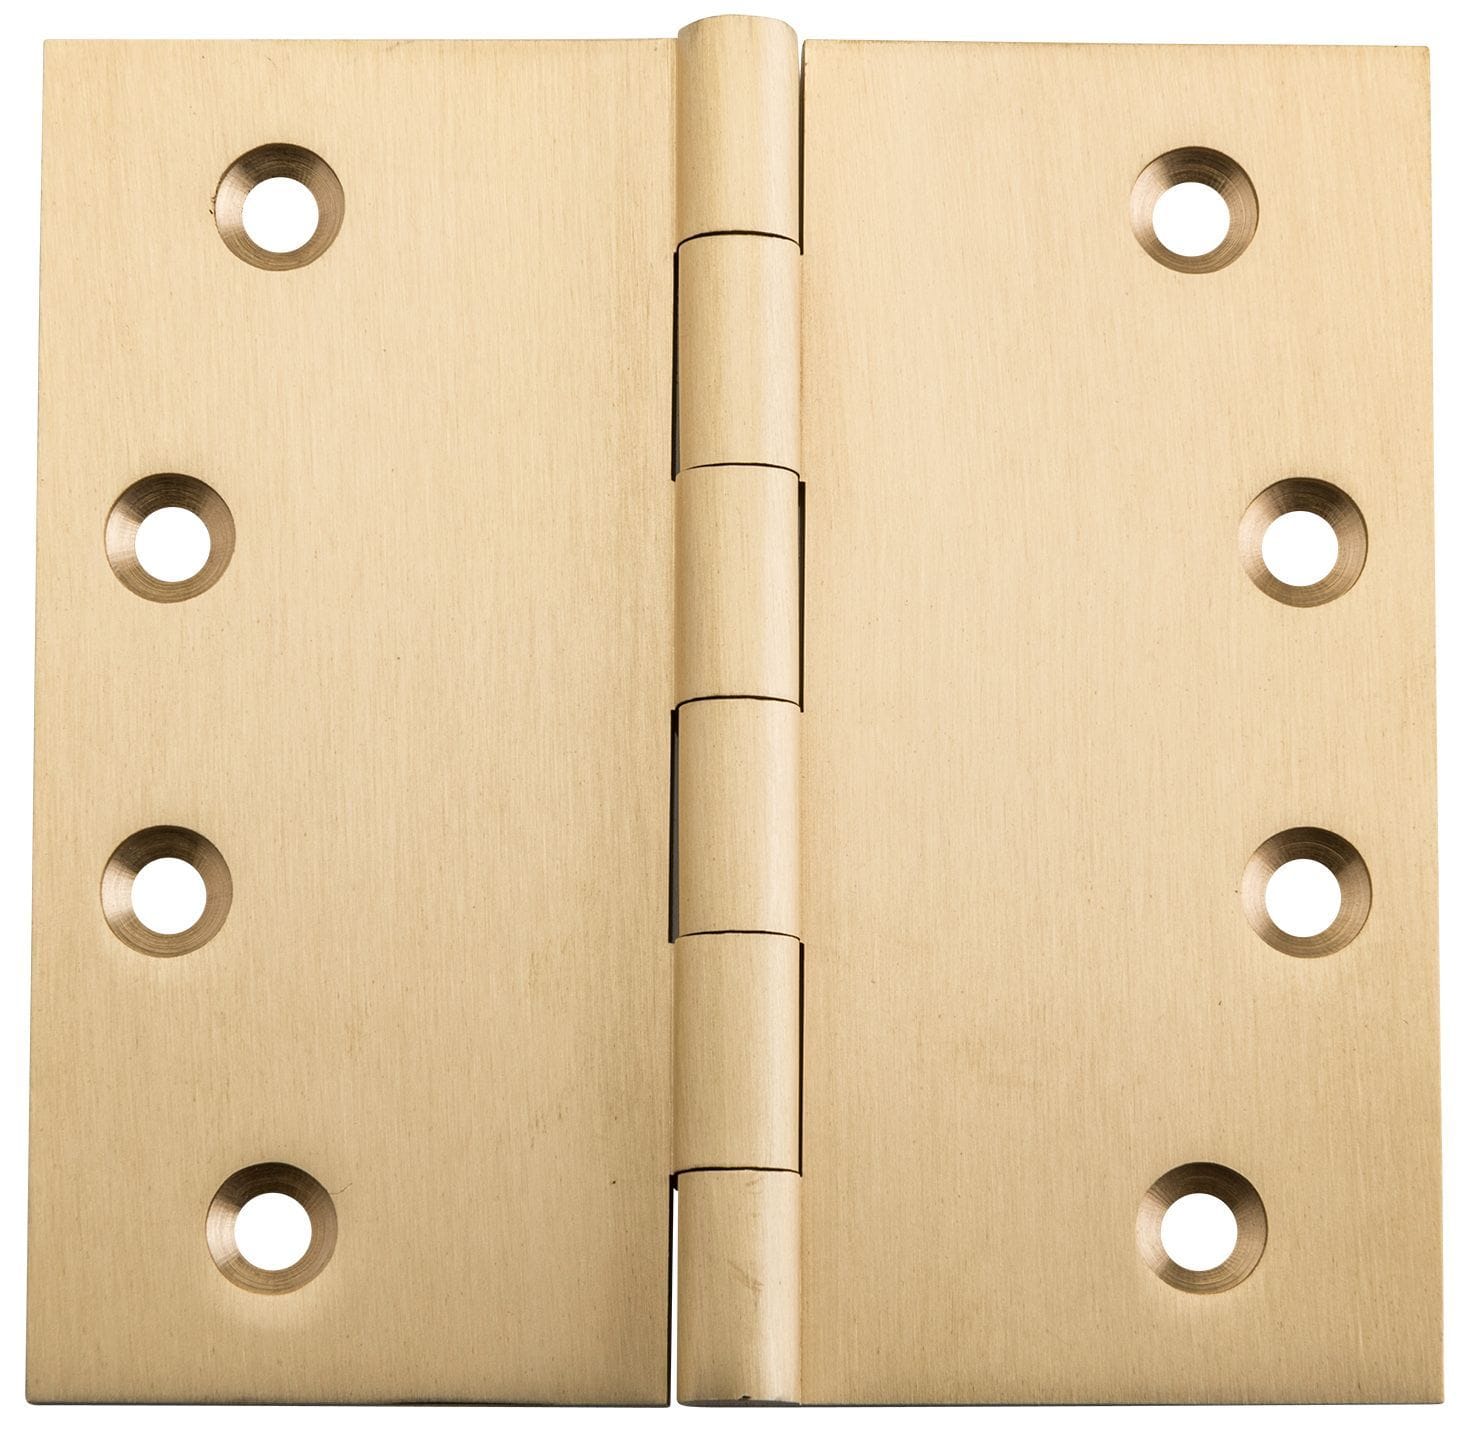 Hinge - Fixed Pin Unlacquered Satin Brass 100mm x 100mm